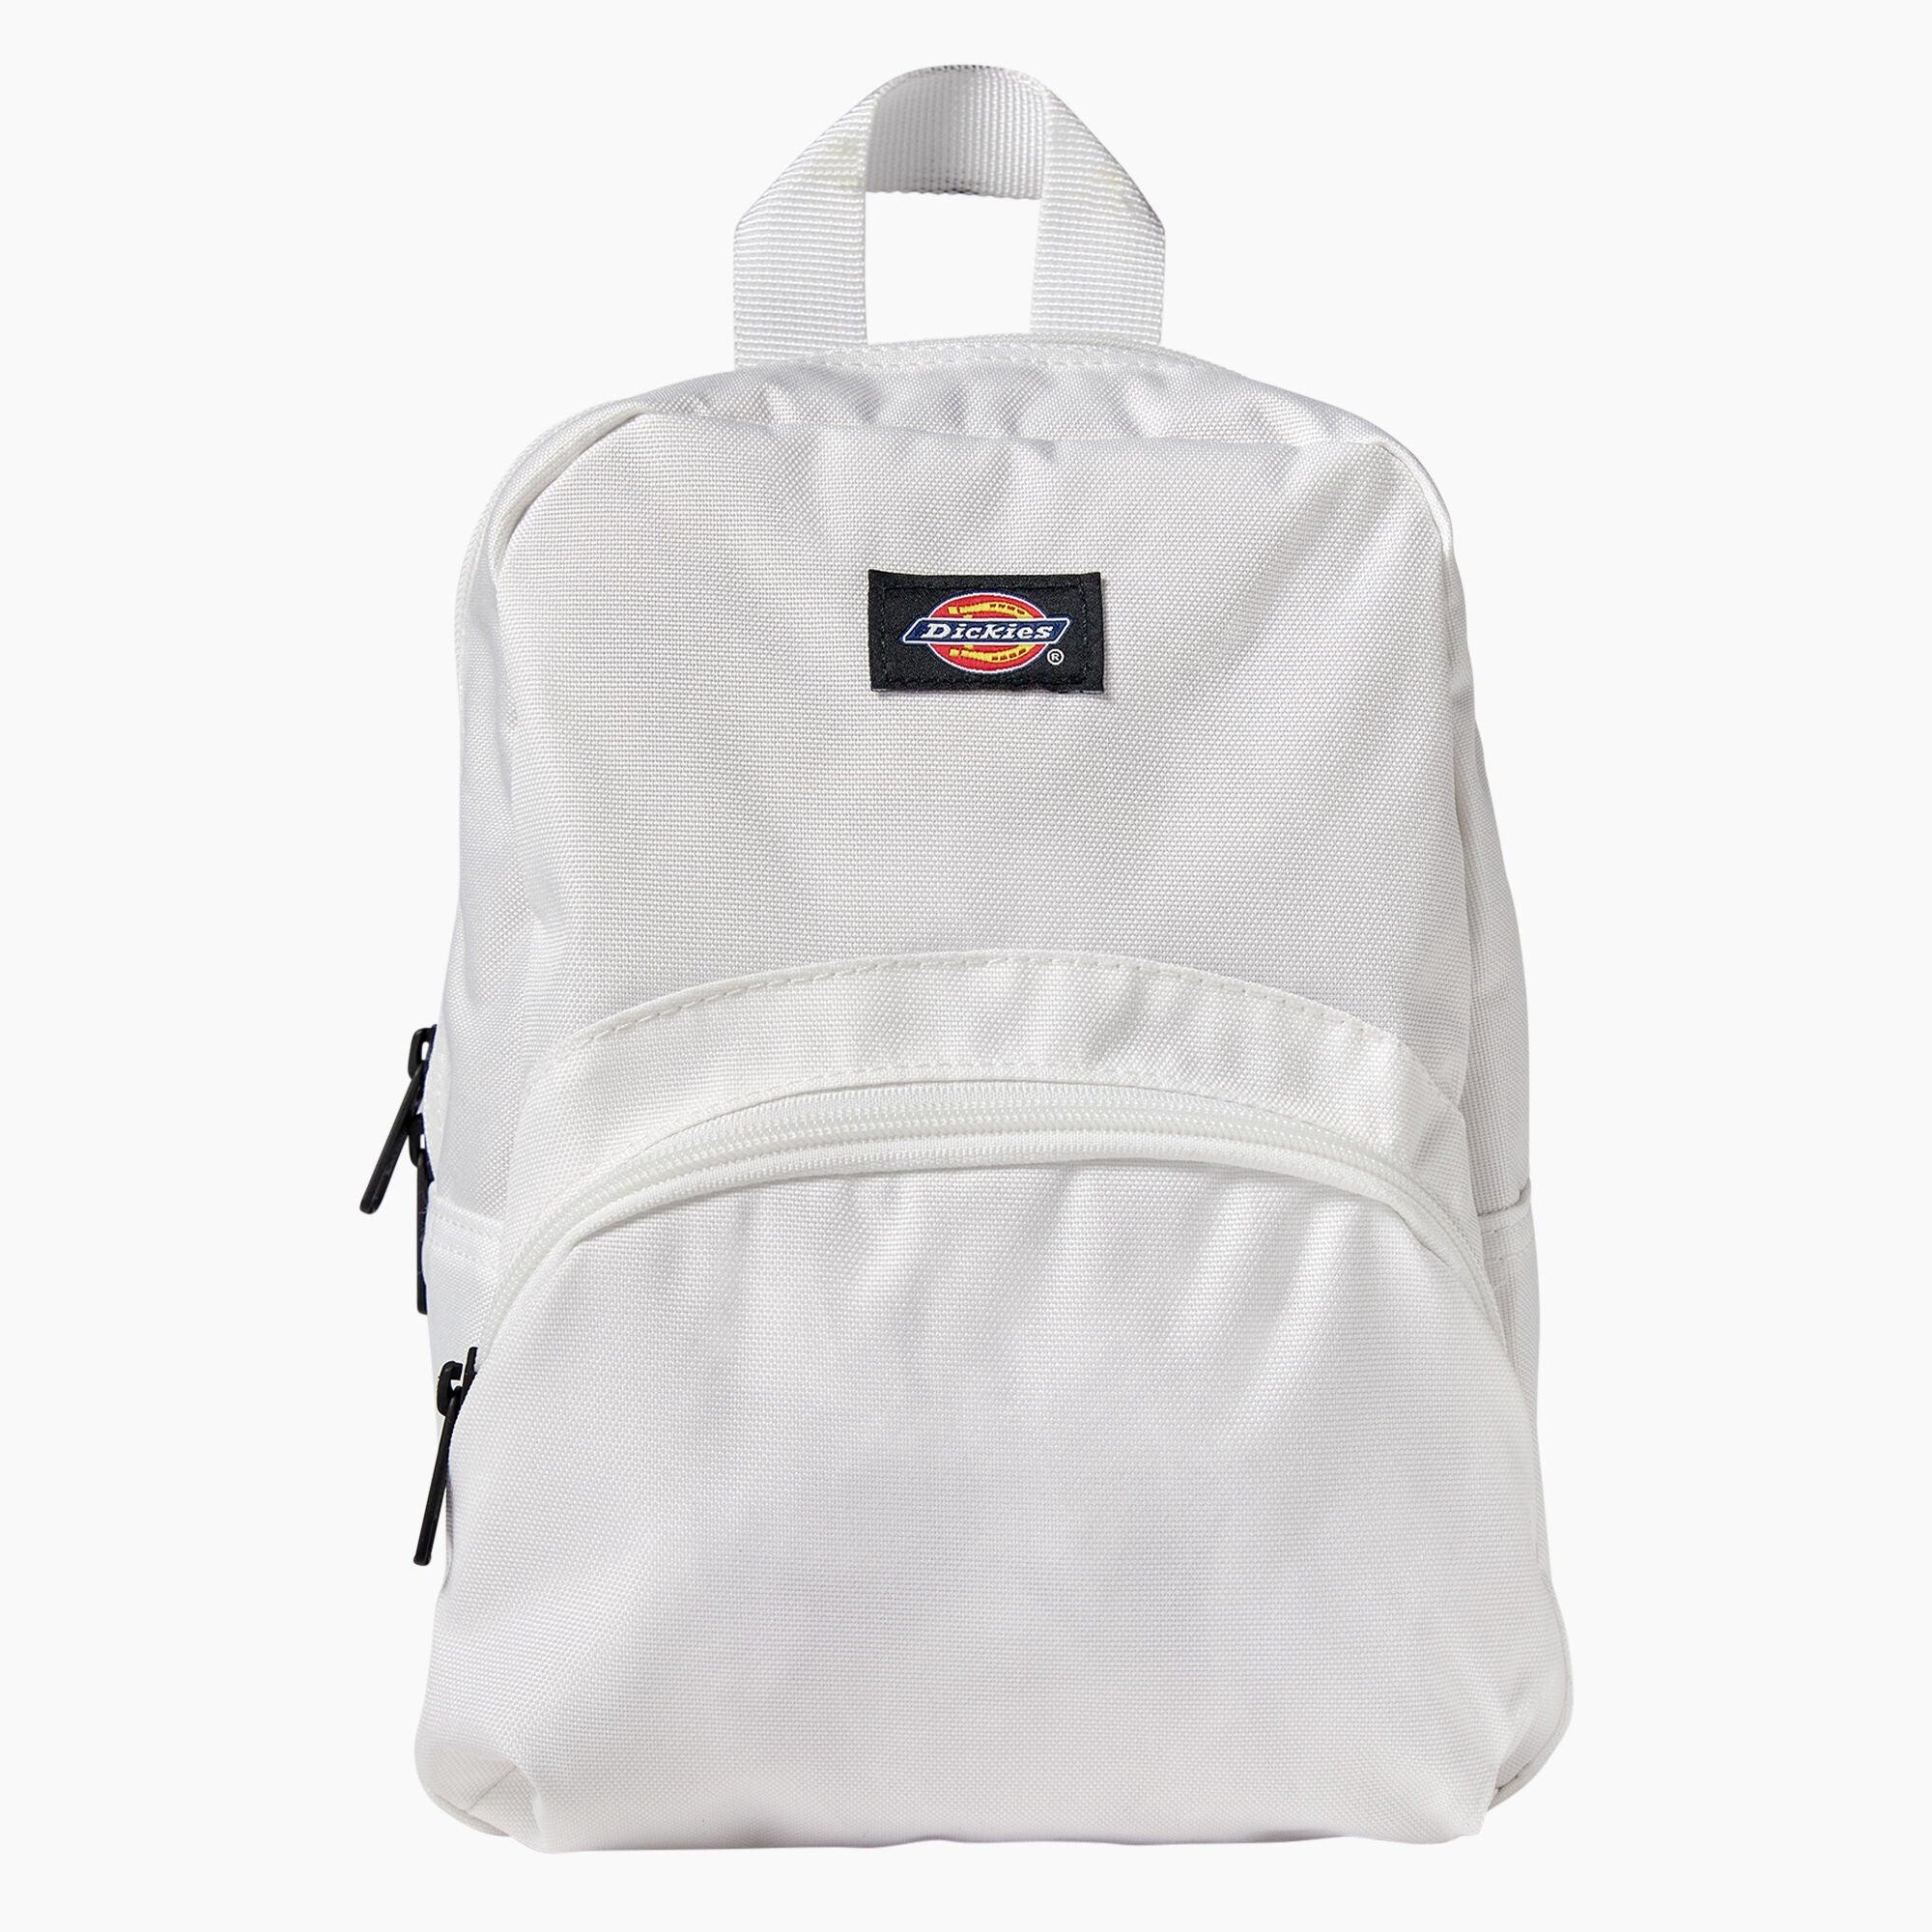 Mini Backpack, White - Purpose-Built / Home of the Trades